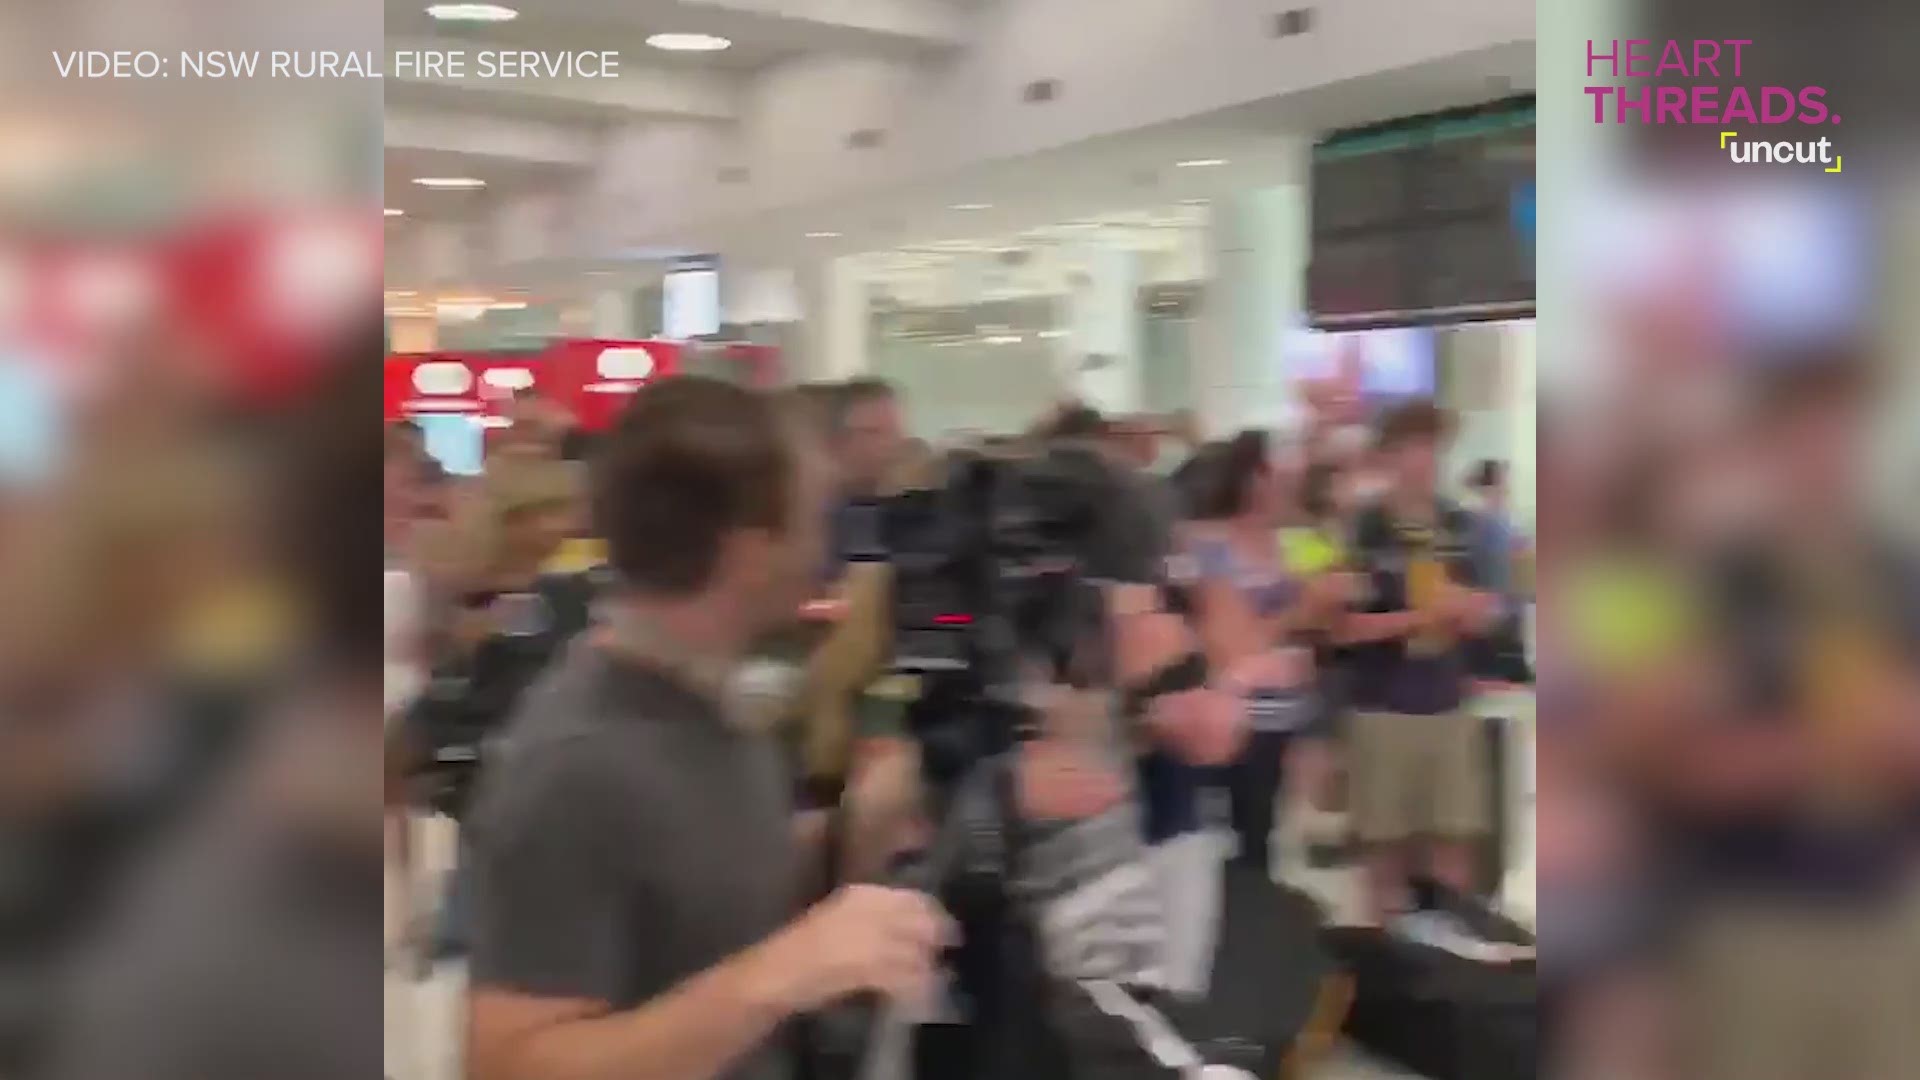 Firefighters sent from the U.S. to help with Australian wildfires were greeted with applause at the Sydney airport.